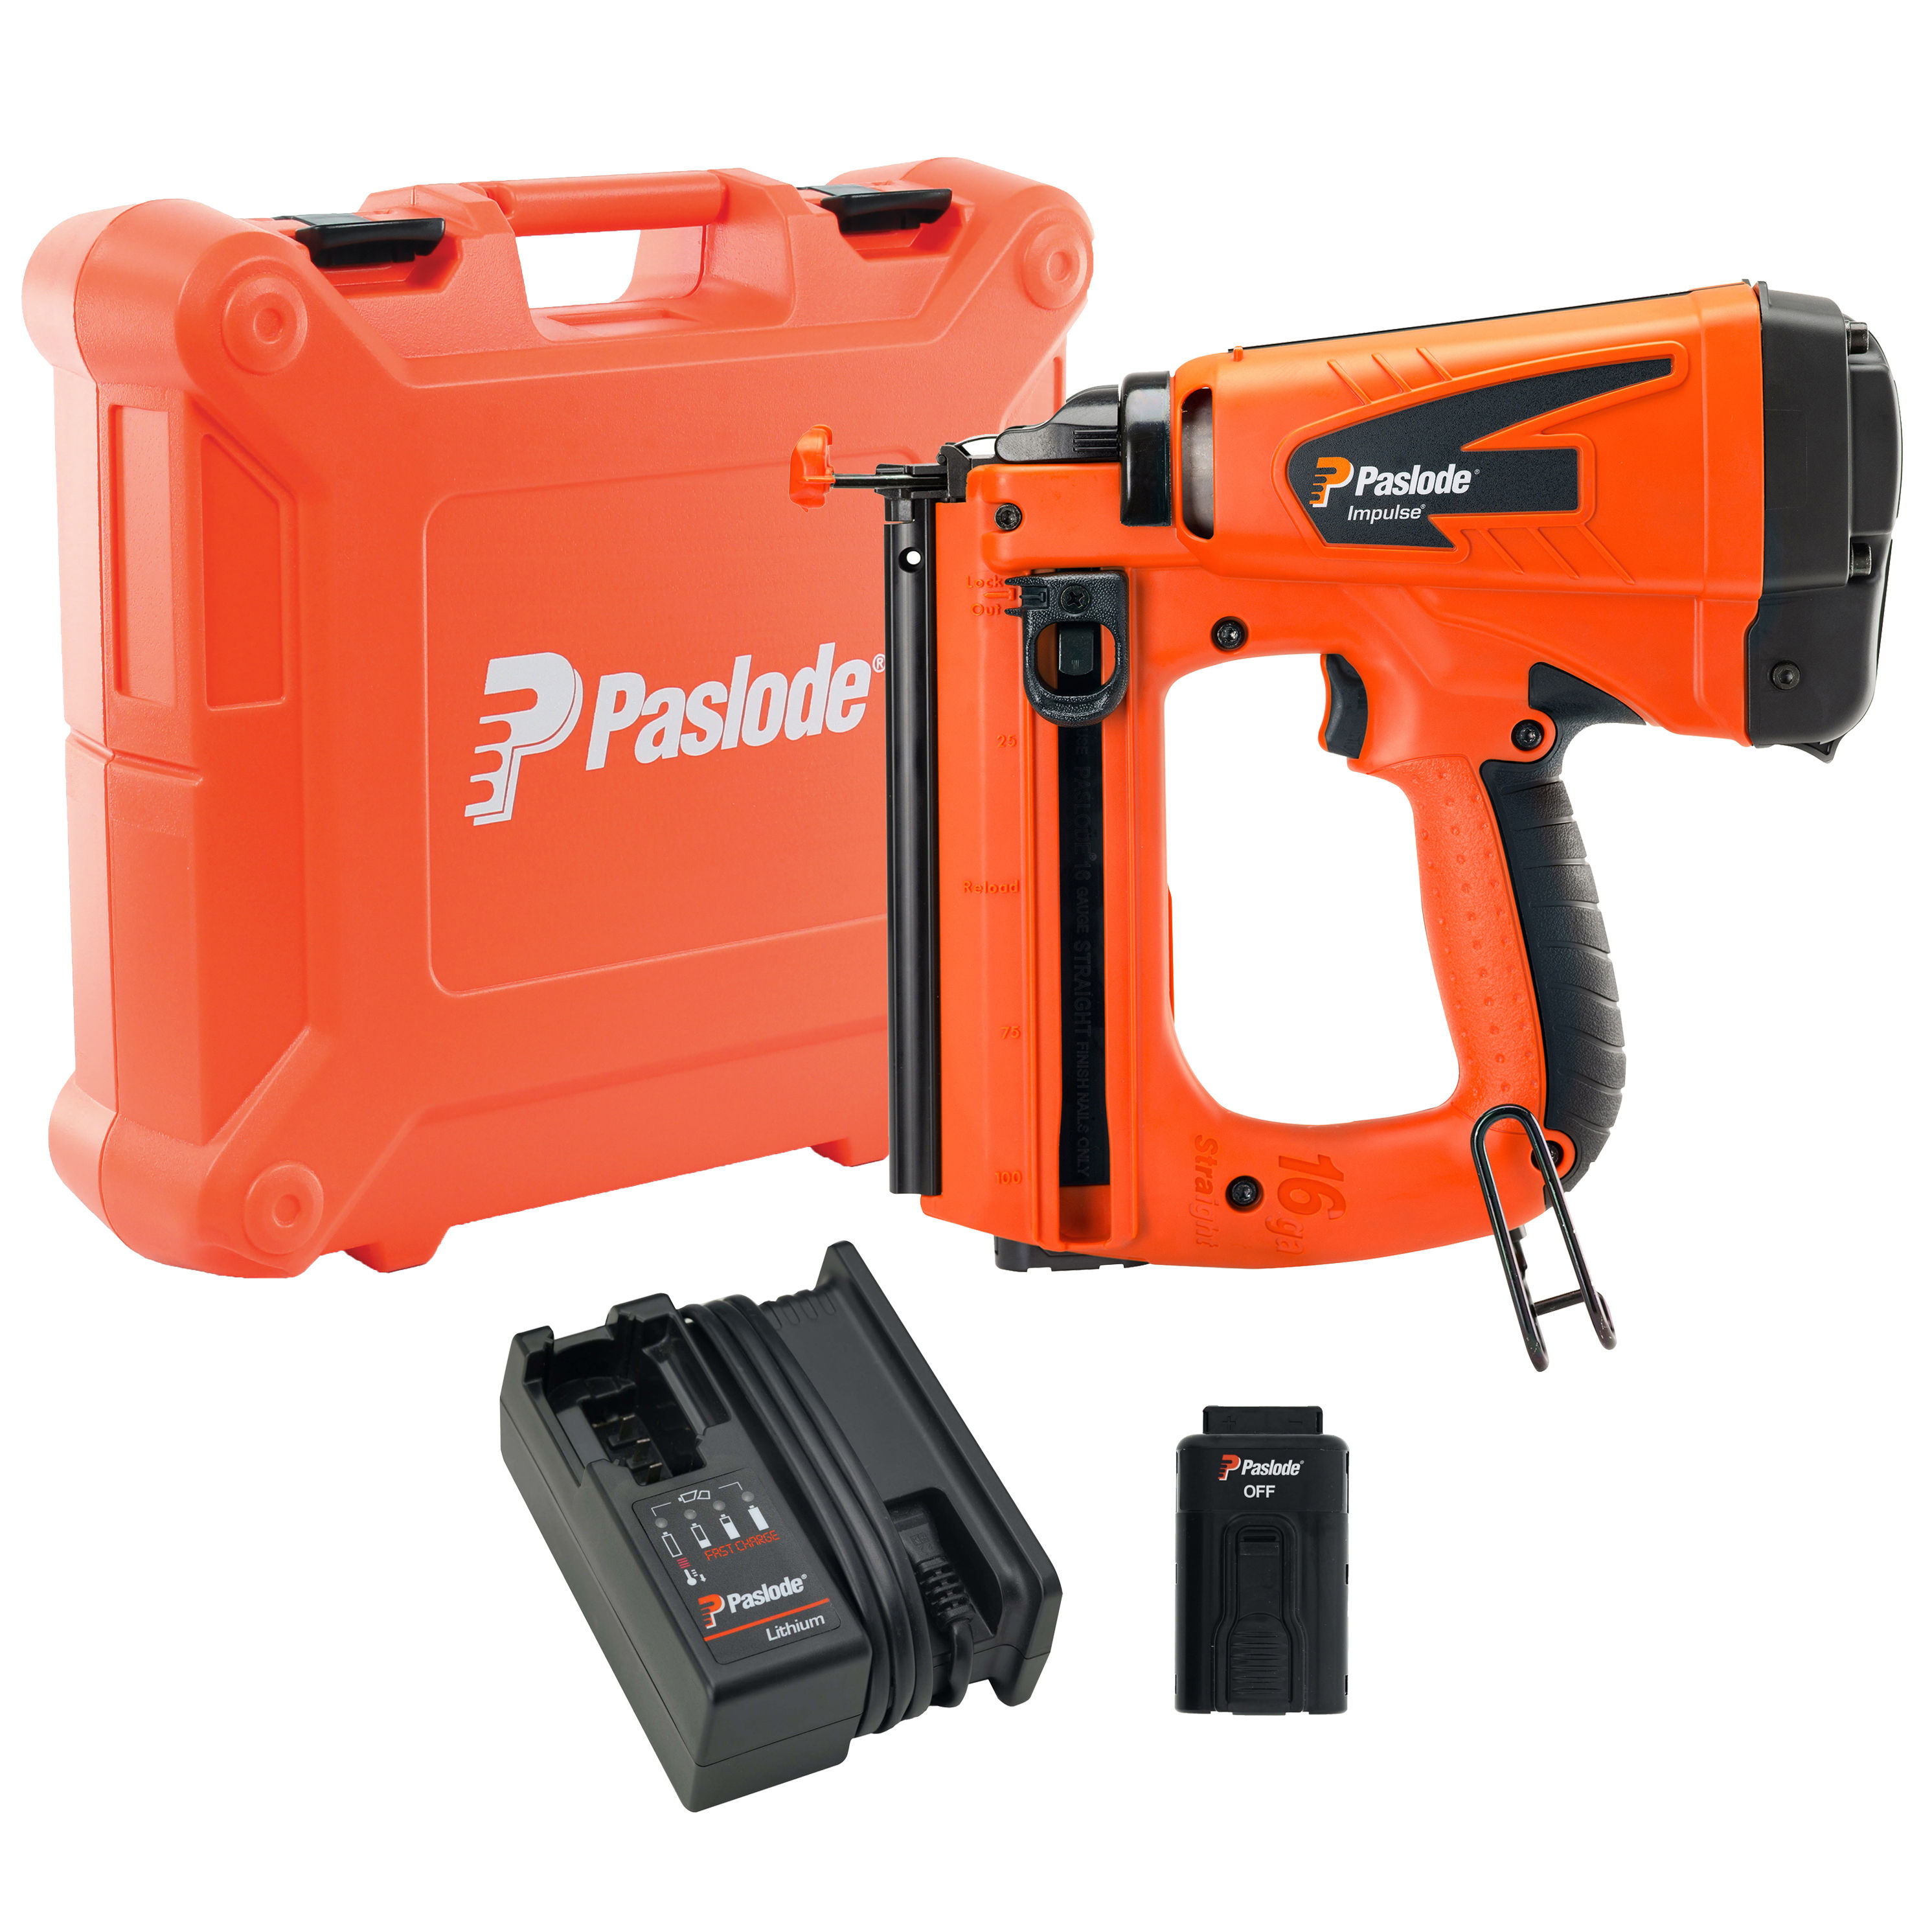 Cordless Nailers & Staplers - BPM Toolcraft